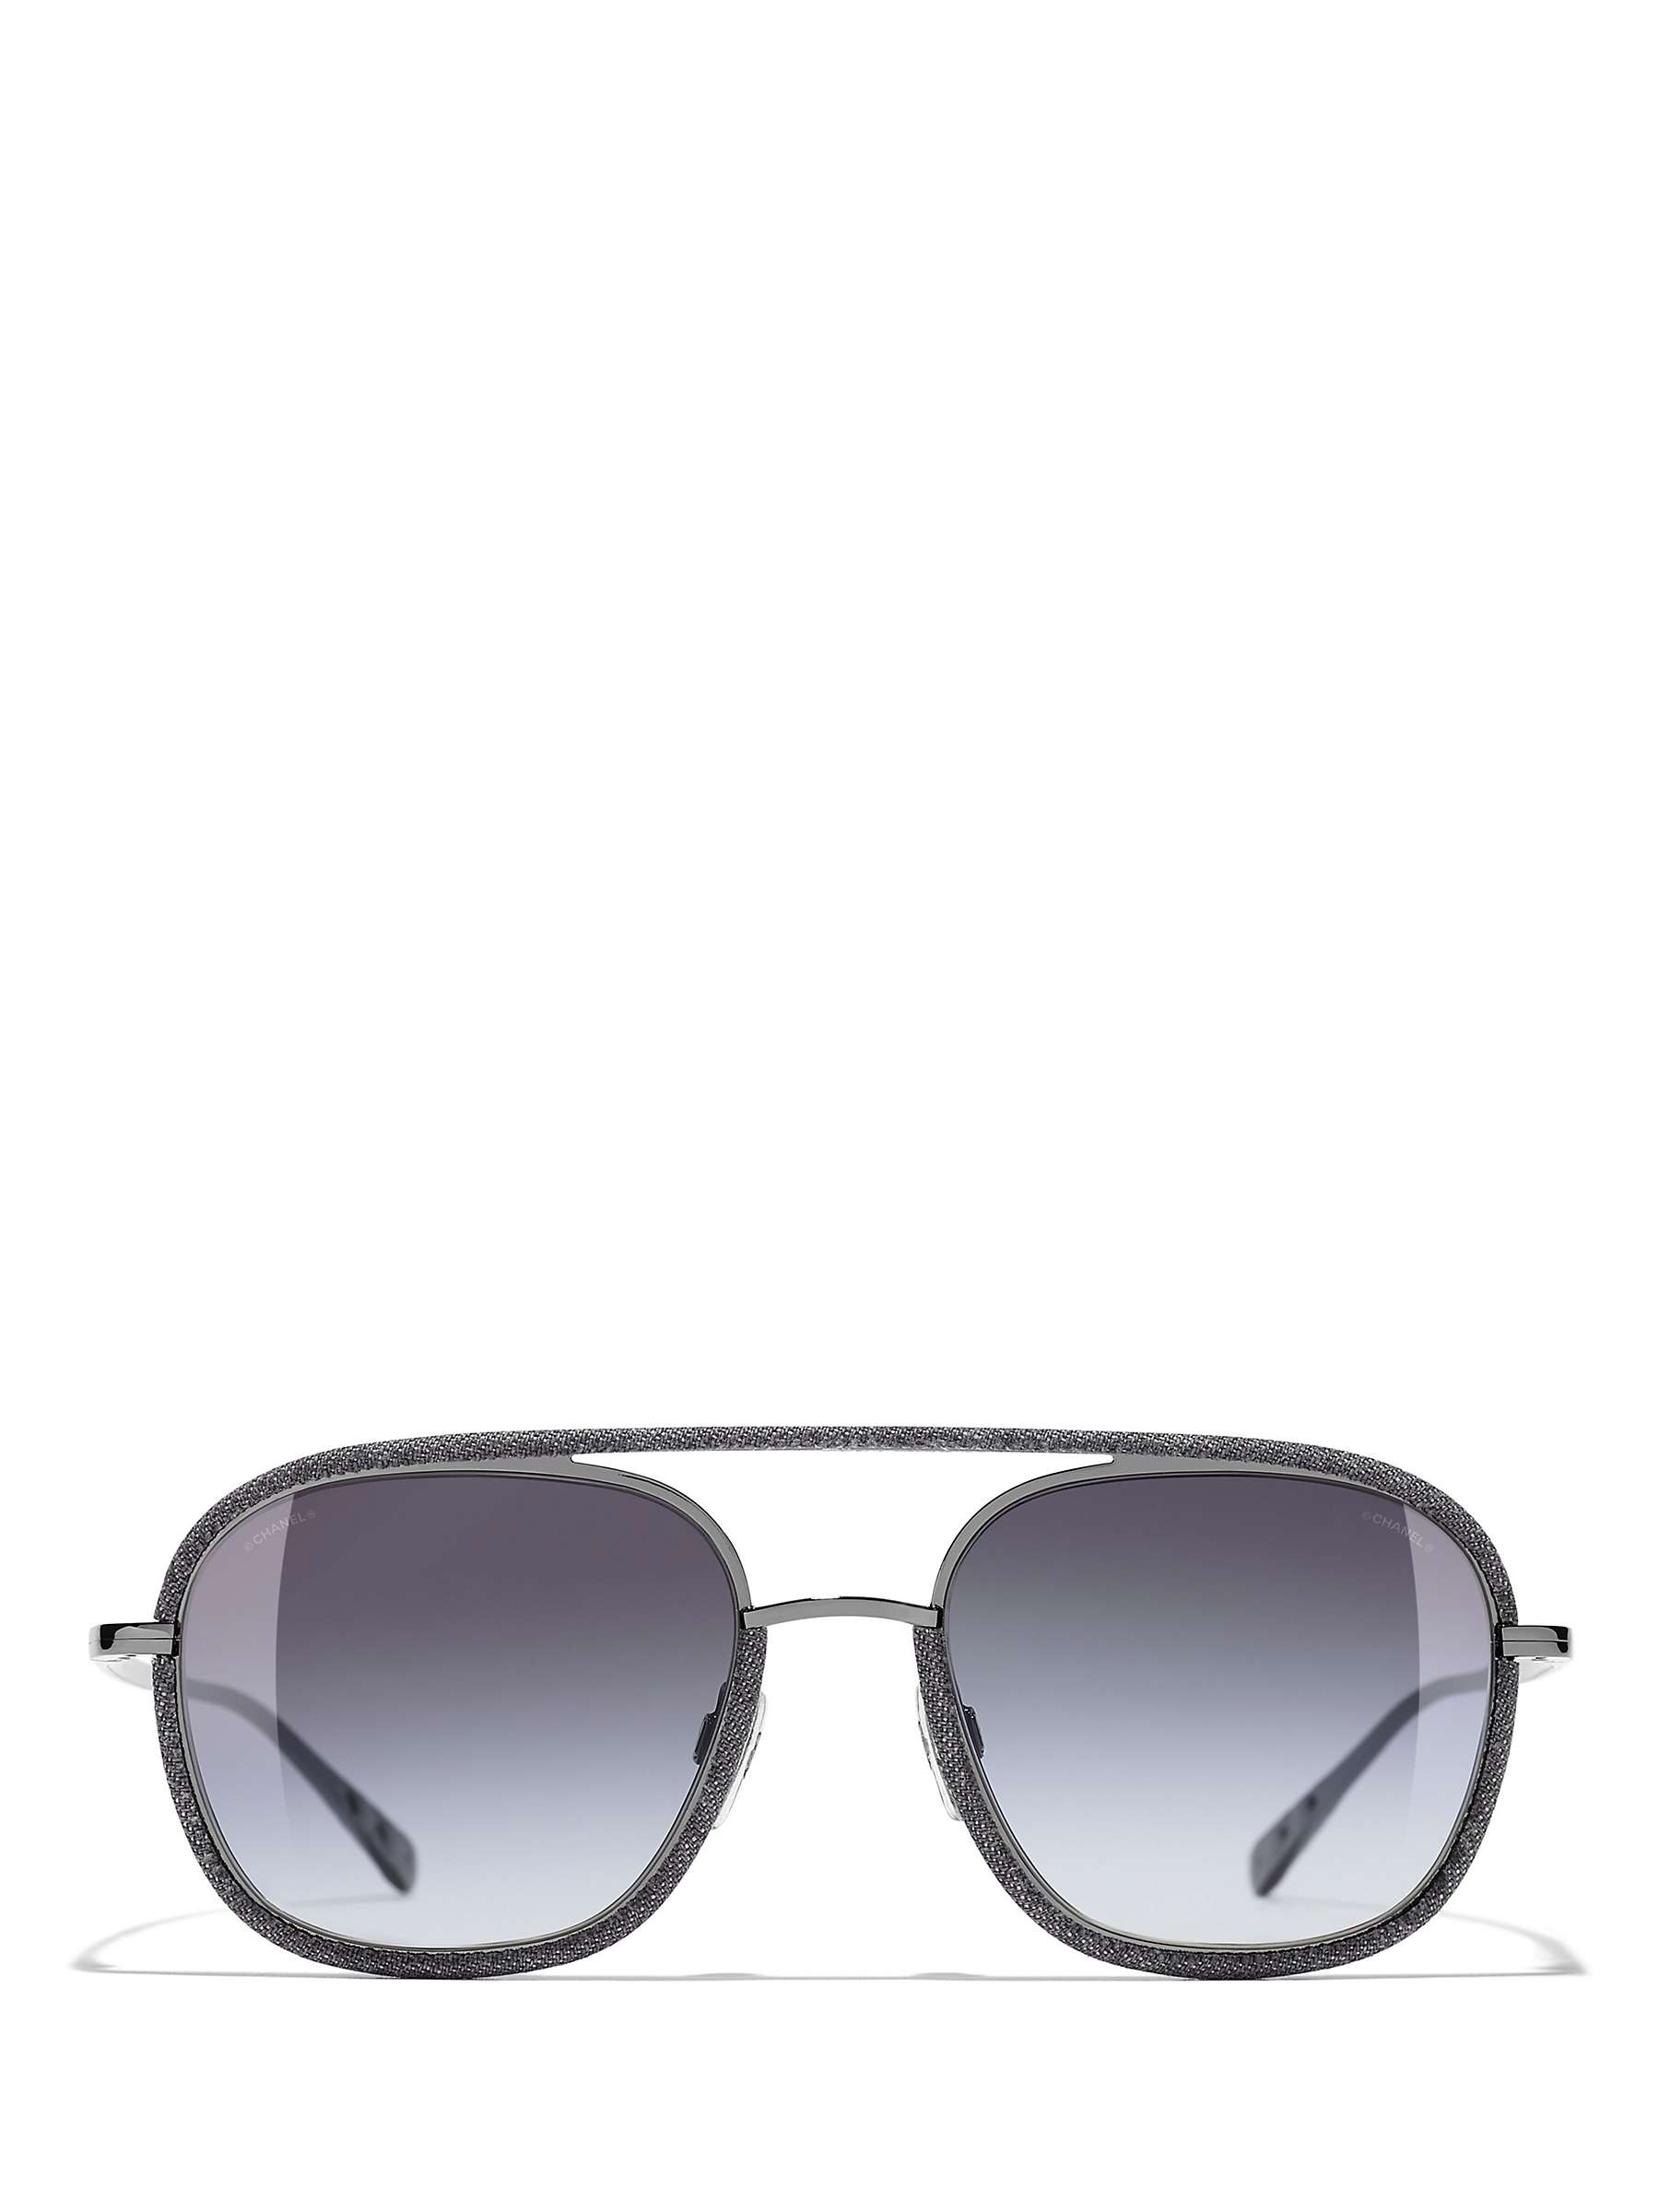 Buy CHANEL Oval Sunglasses CH4249J Silver/Grey Gradient Online at johnlewis.com